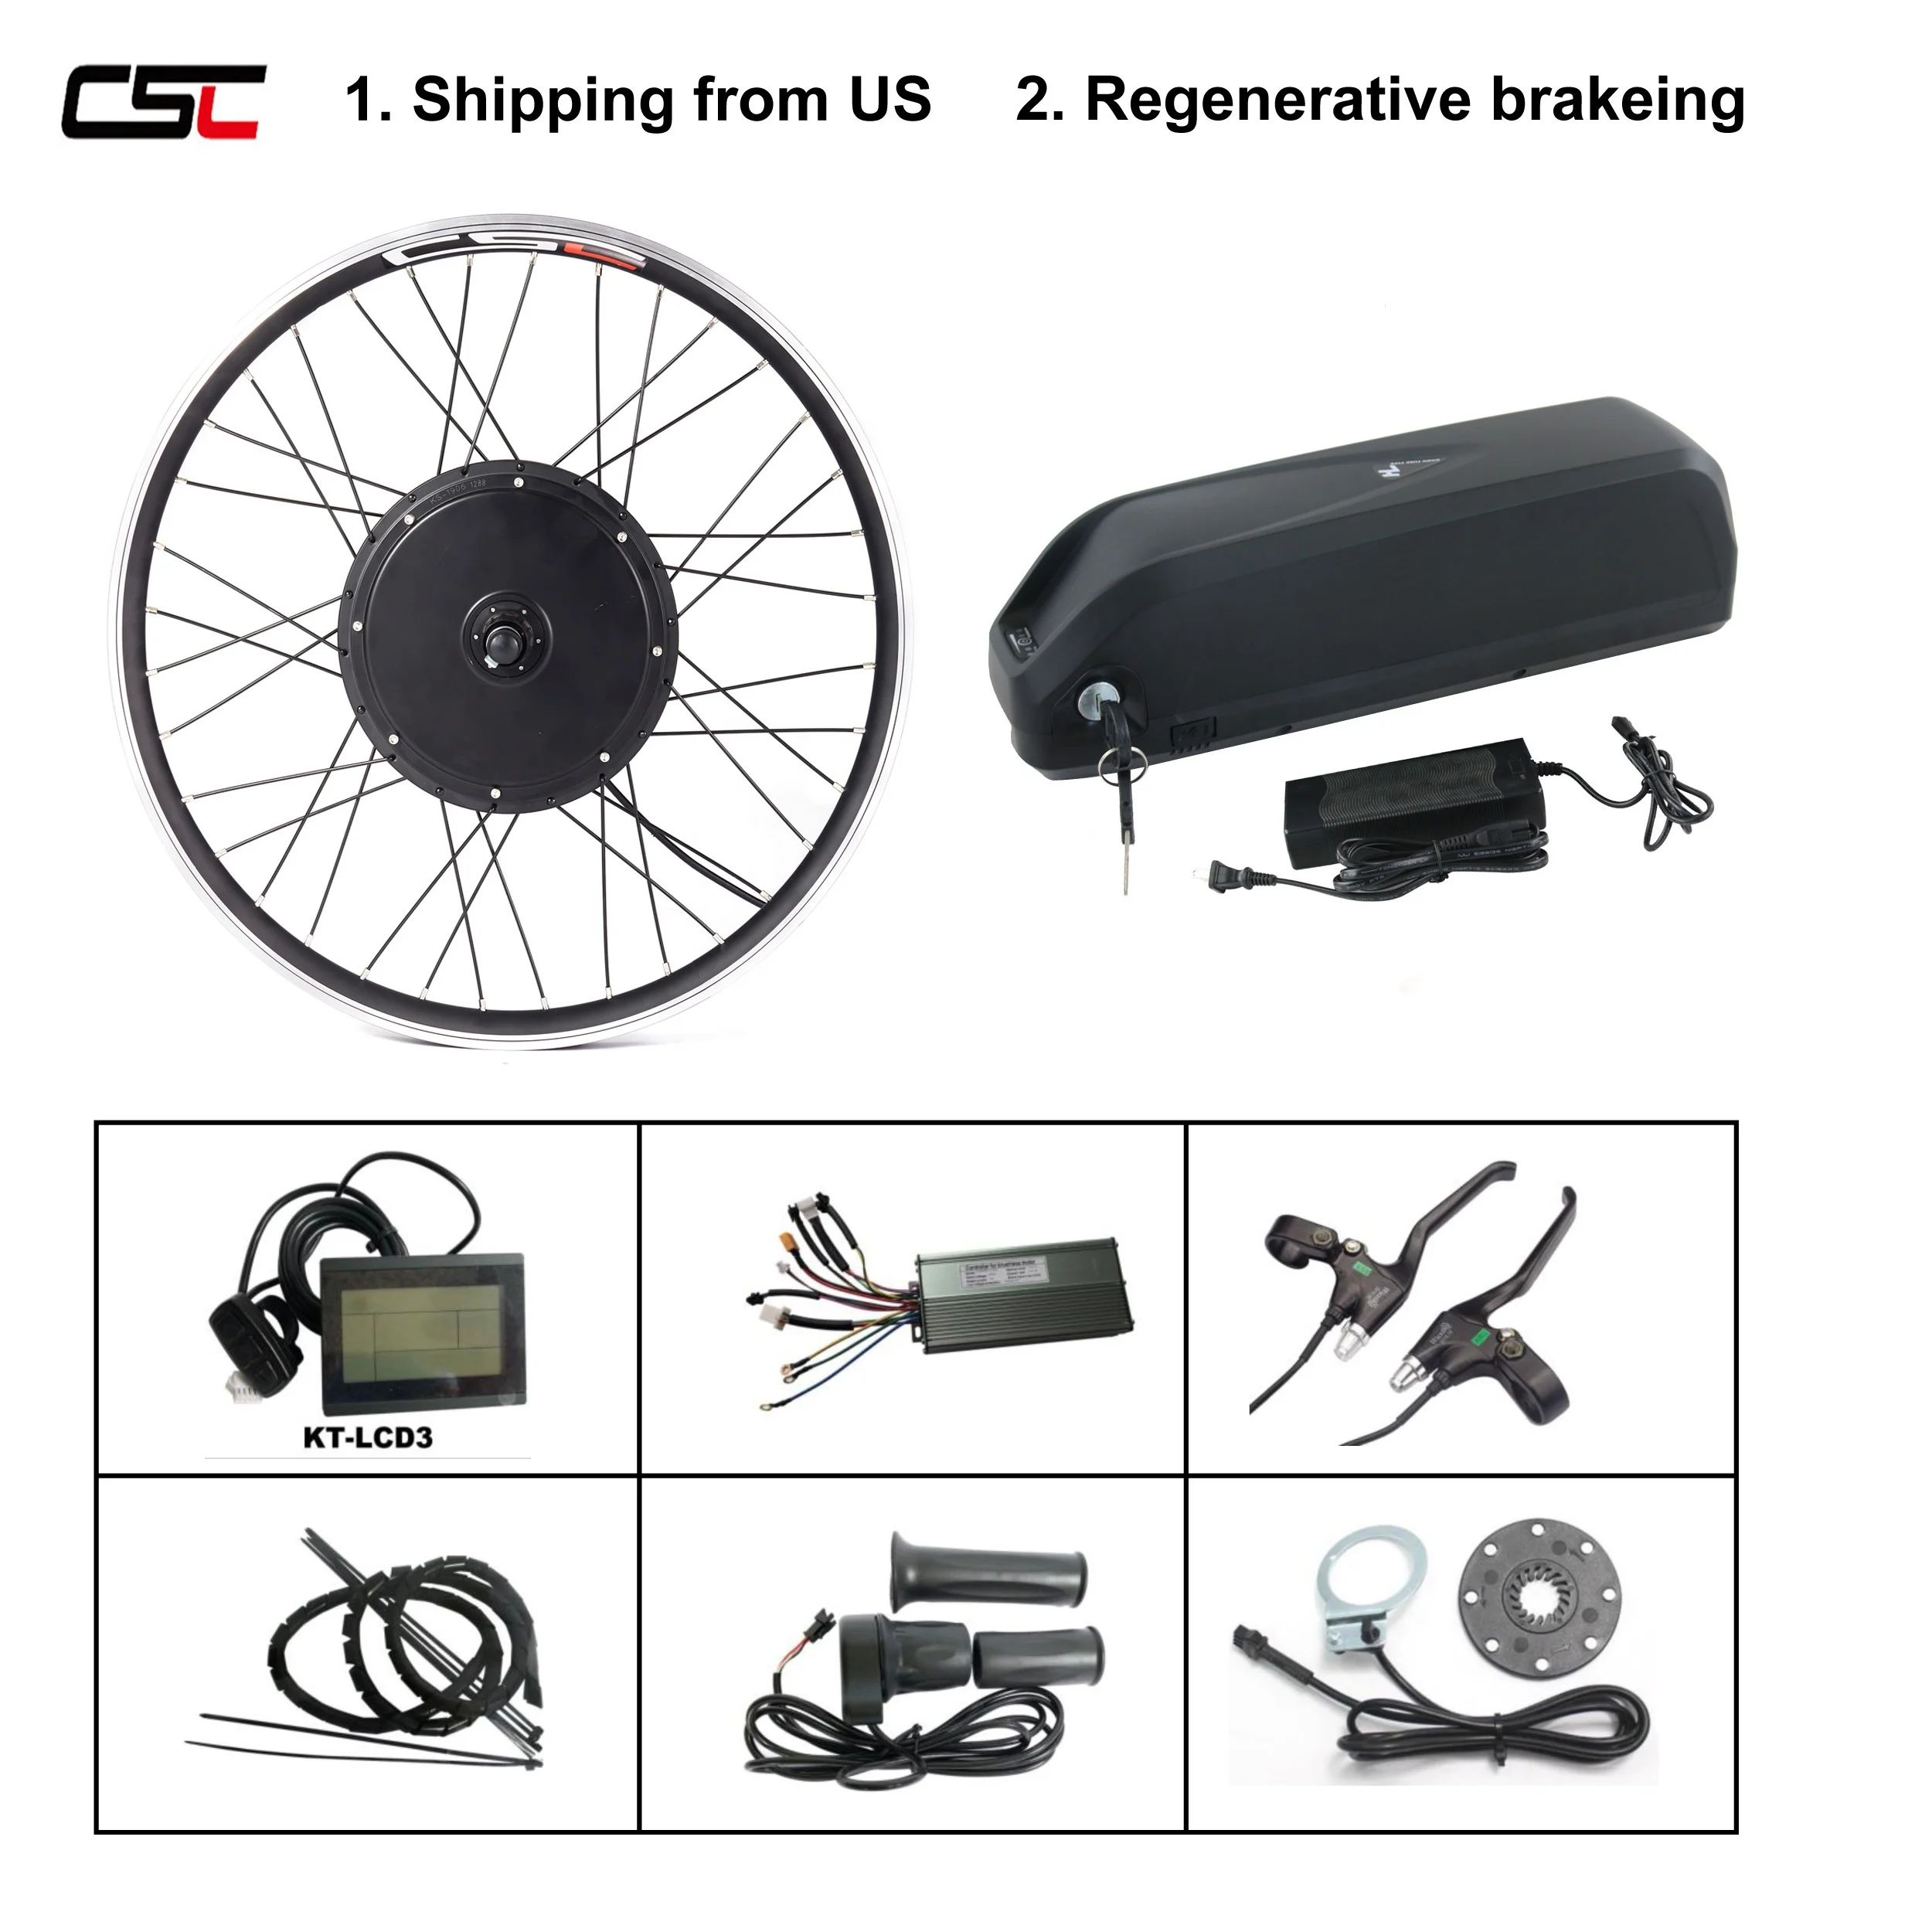 

CSC Shipping from US 48V 1000W Electric bike kit Rear wheel ebike conversion 27.5inch with Regenerative braking